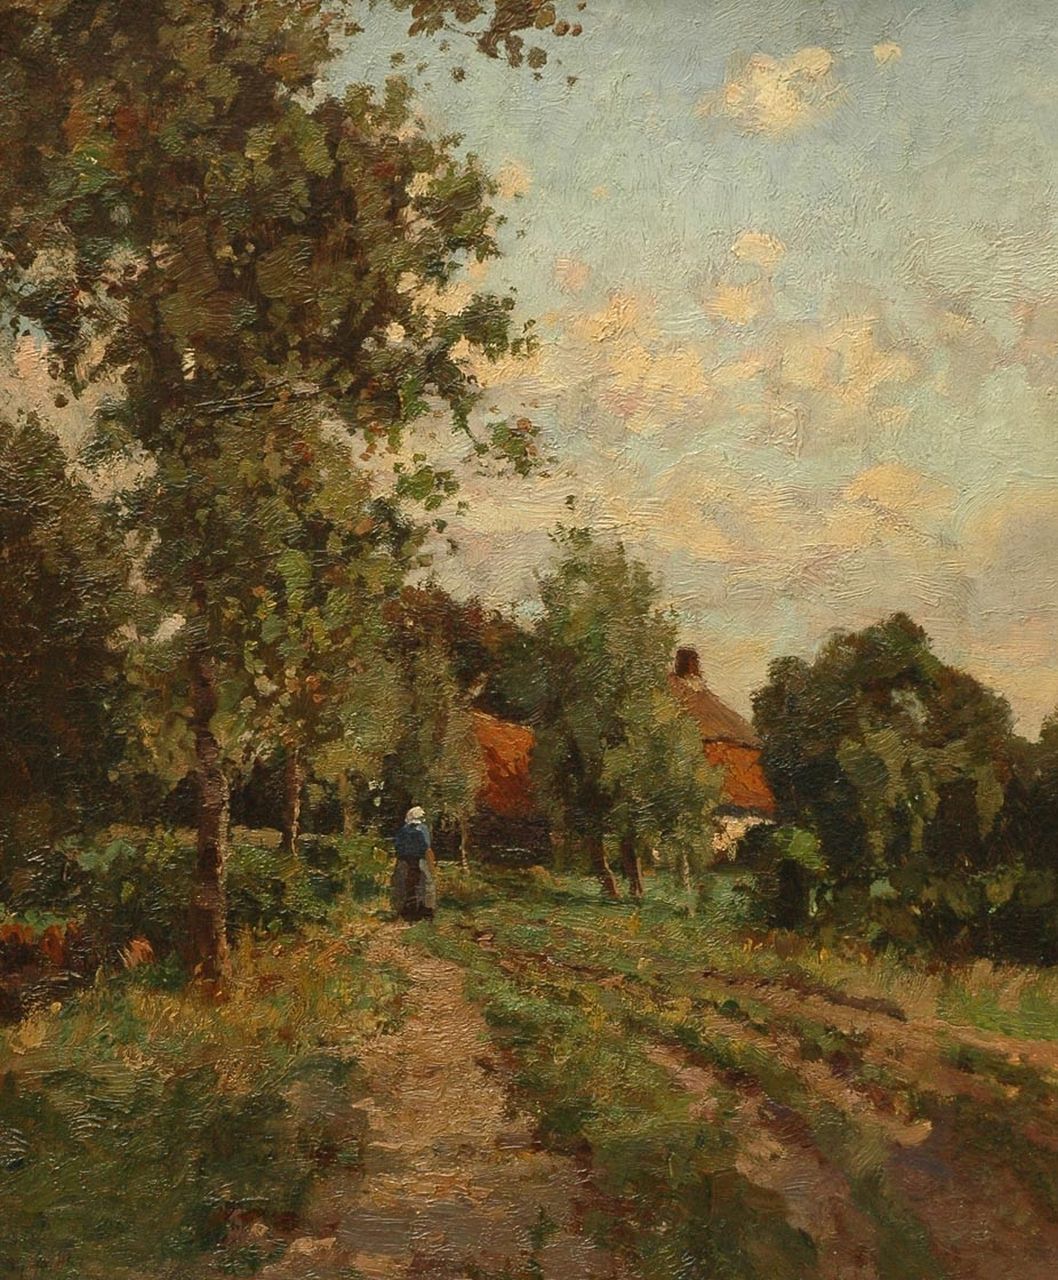 Zwart A.J.  | Adrianus Johannes 'Arie' Zwart | Paintings offered for sale | A summer day in the country, oil on canvas laid down on panel 58.6 x 48.6 cm, signed l.l. and without frame